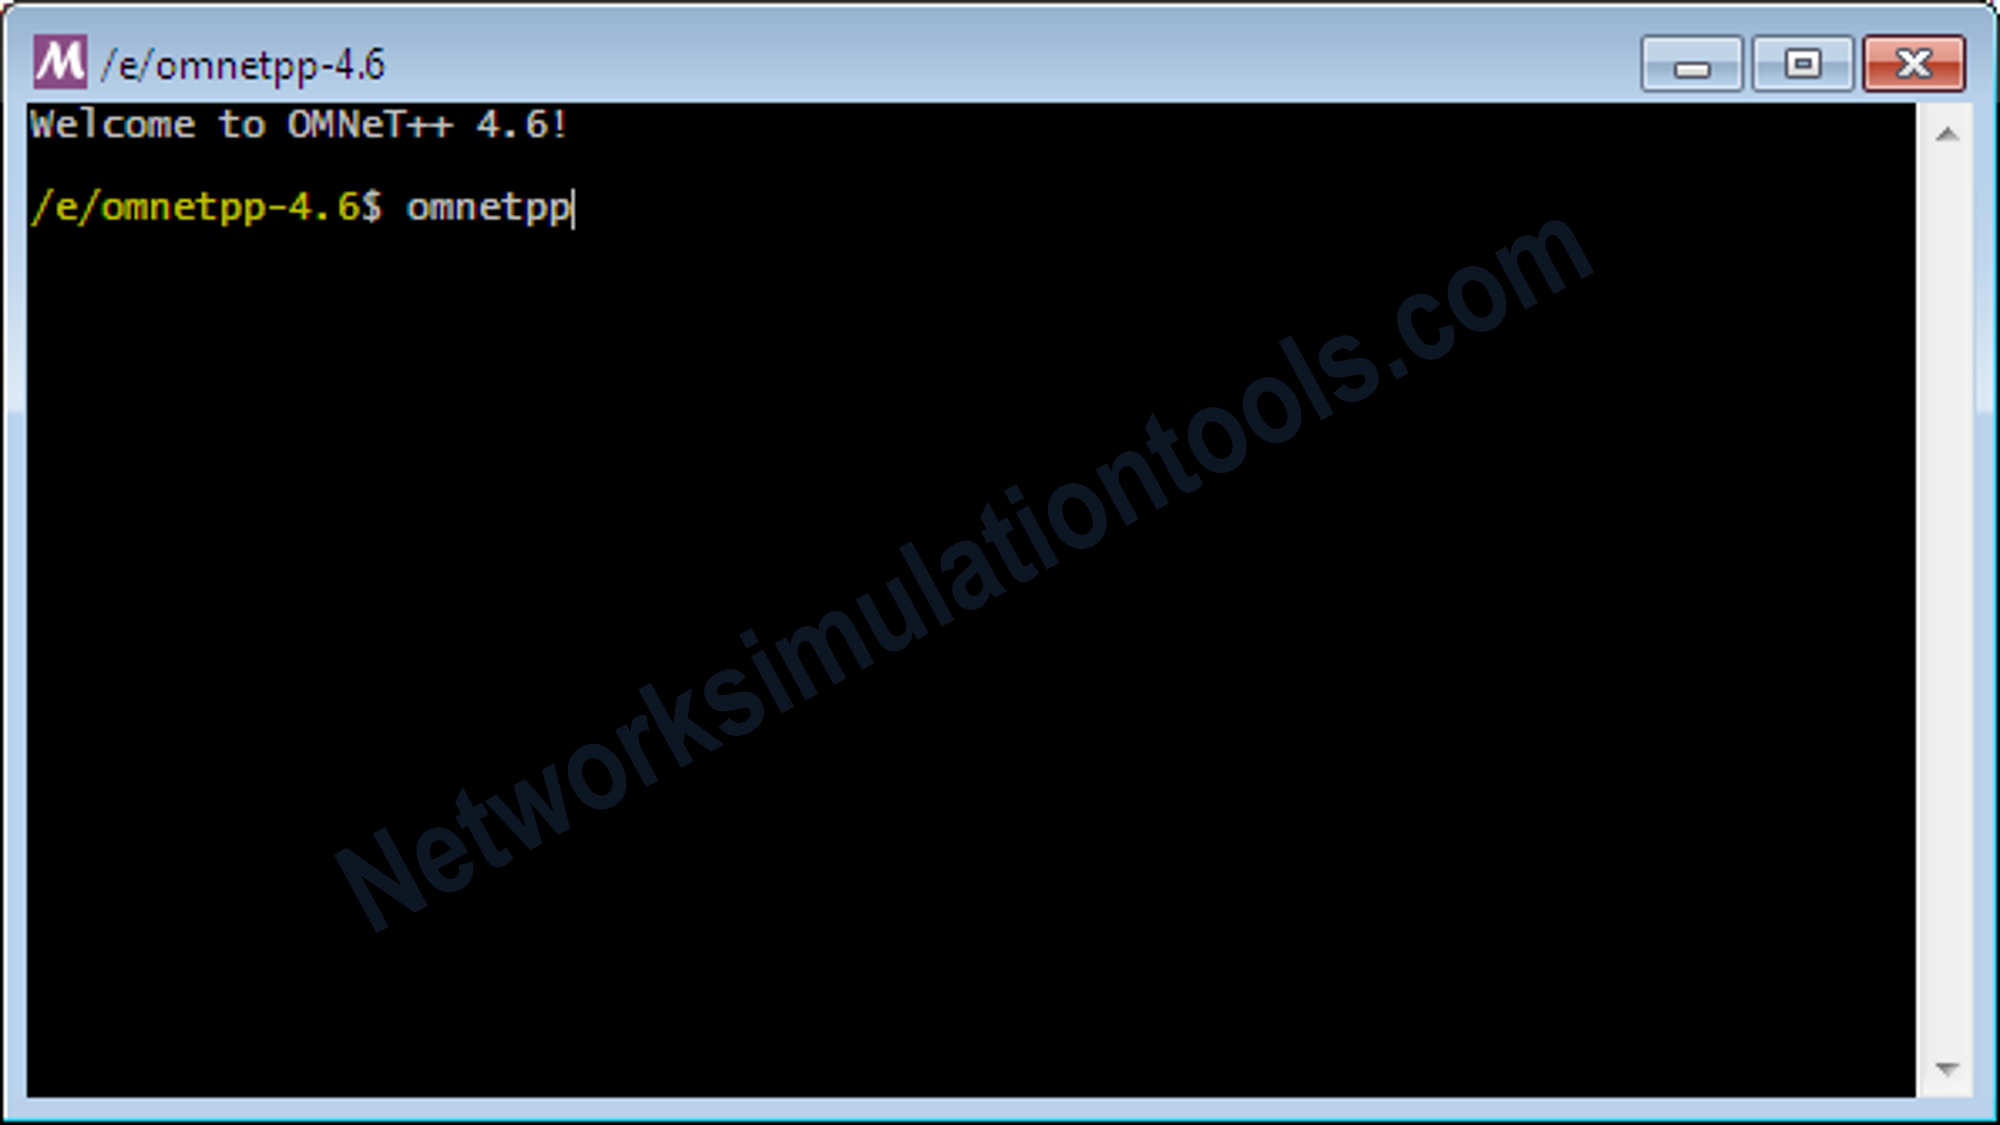 Execute the omnet++ command window